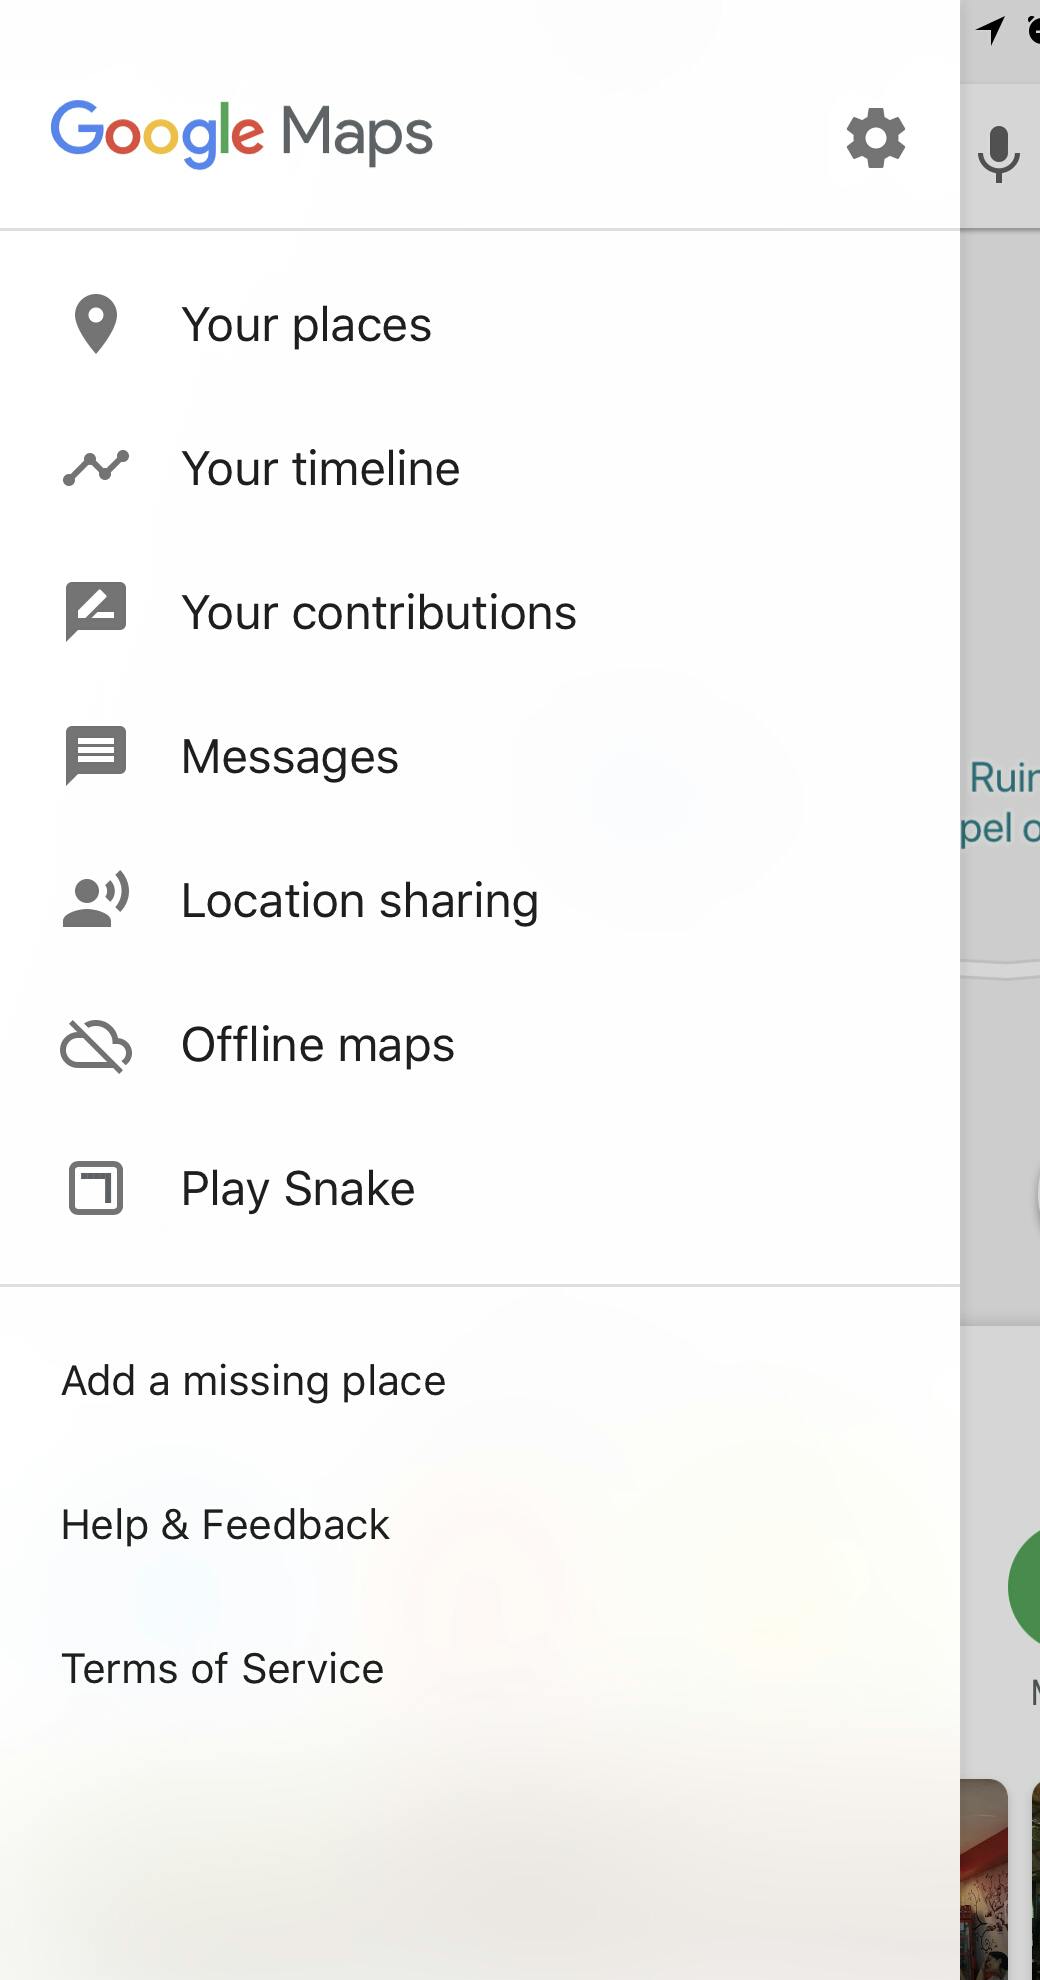 Google Maps' 'Snake' Game For April Fools' Day Will Make You Feel So  Nostalgic